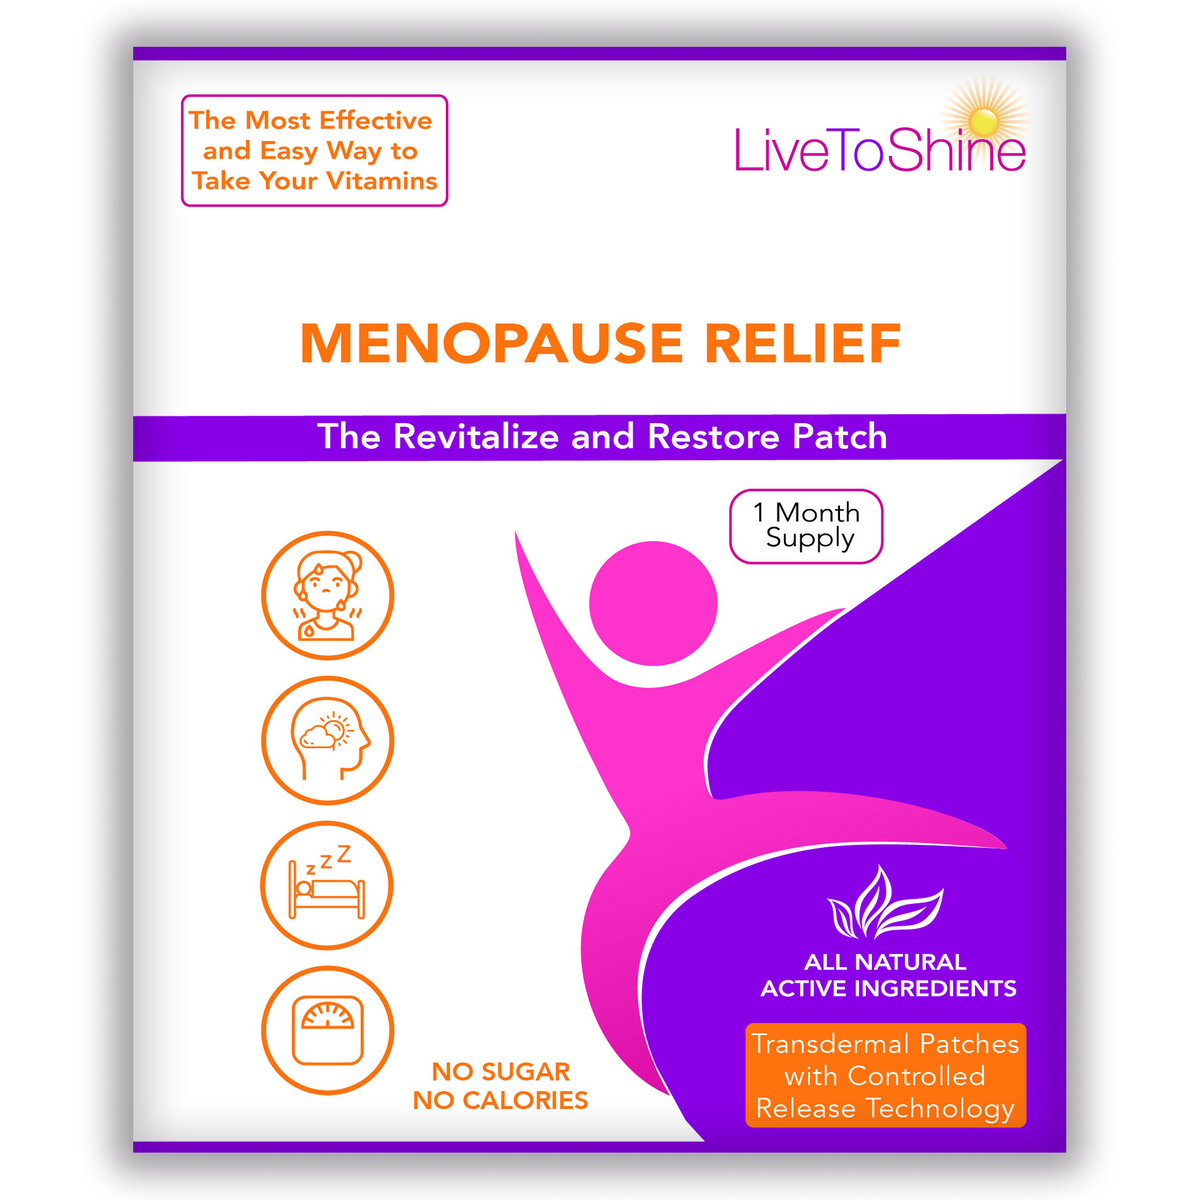 The Menopause Relief Patch